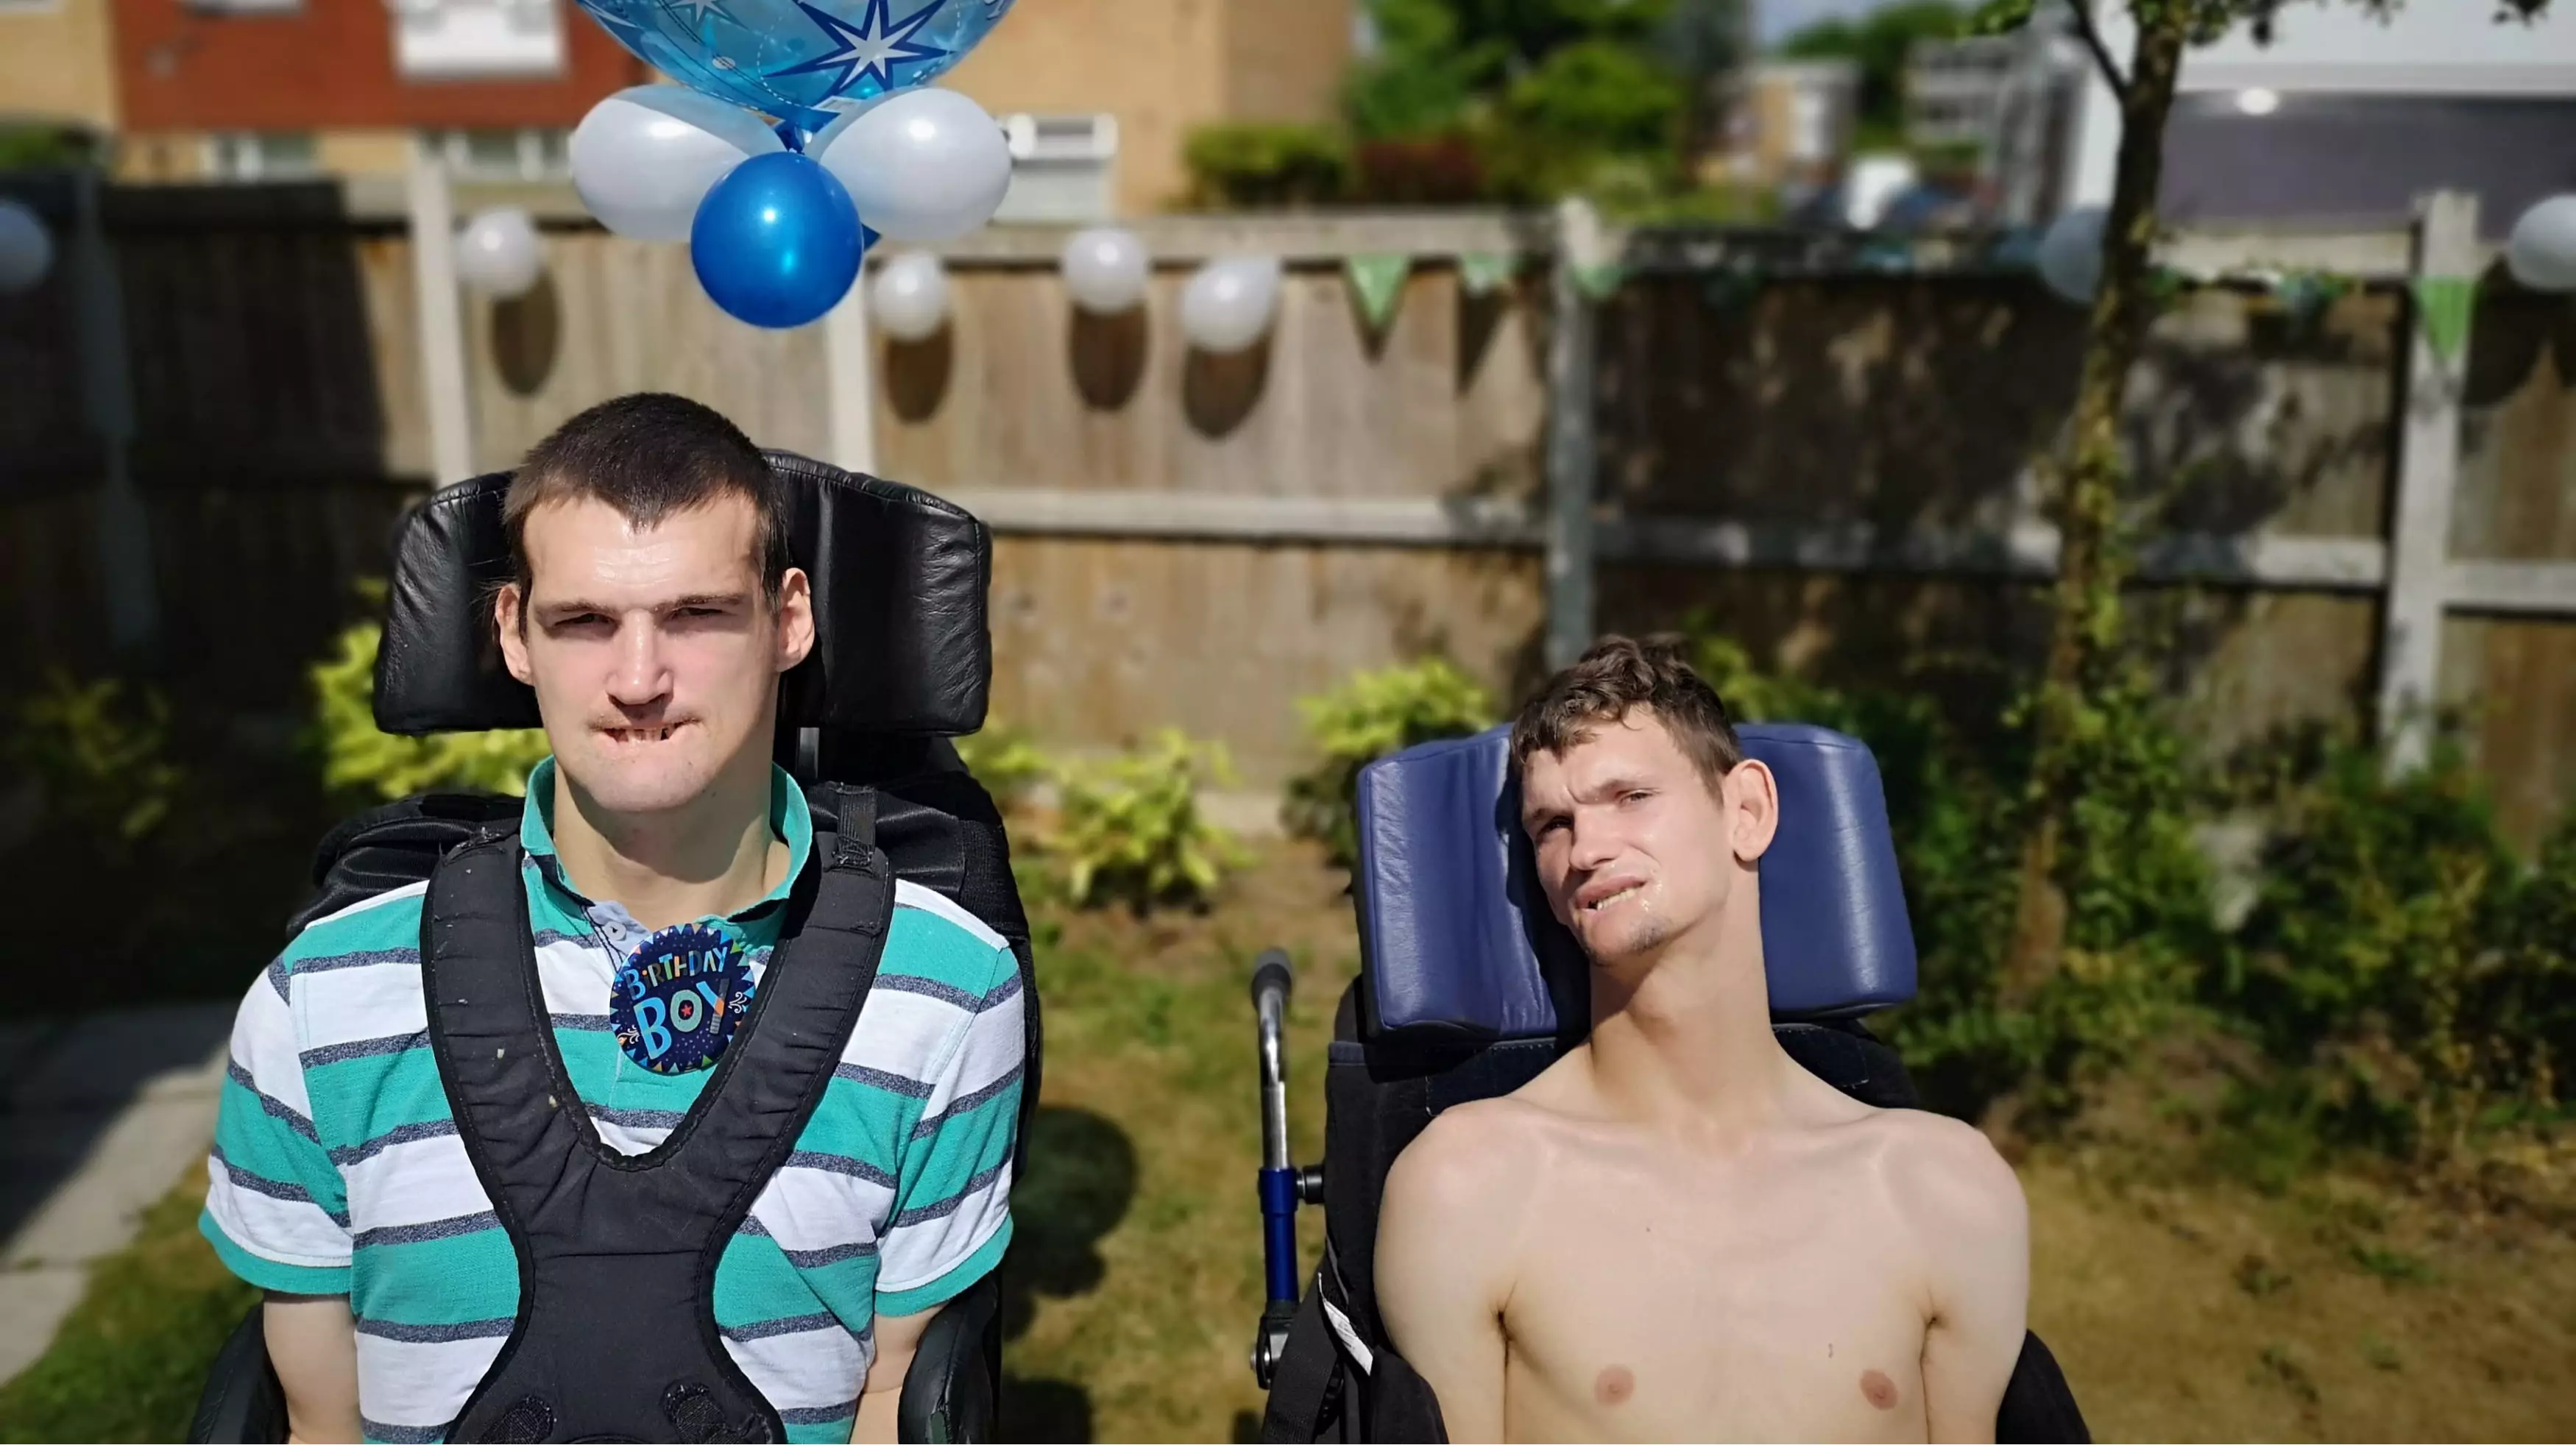 Severely Disabled Man Is Facing Eviction After Brother Died  